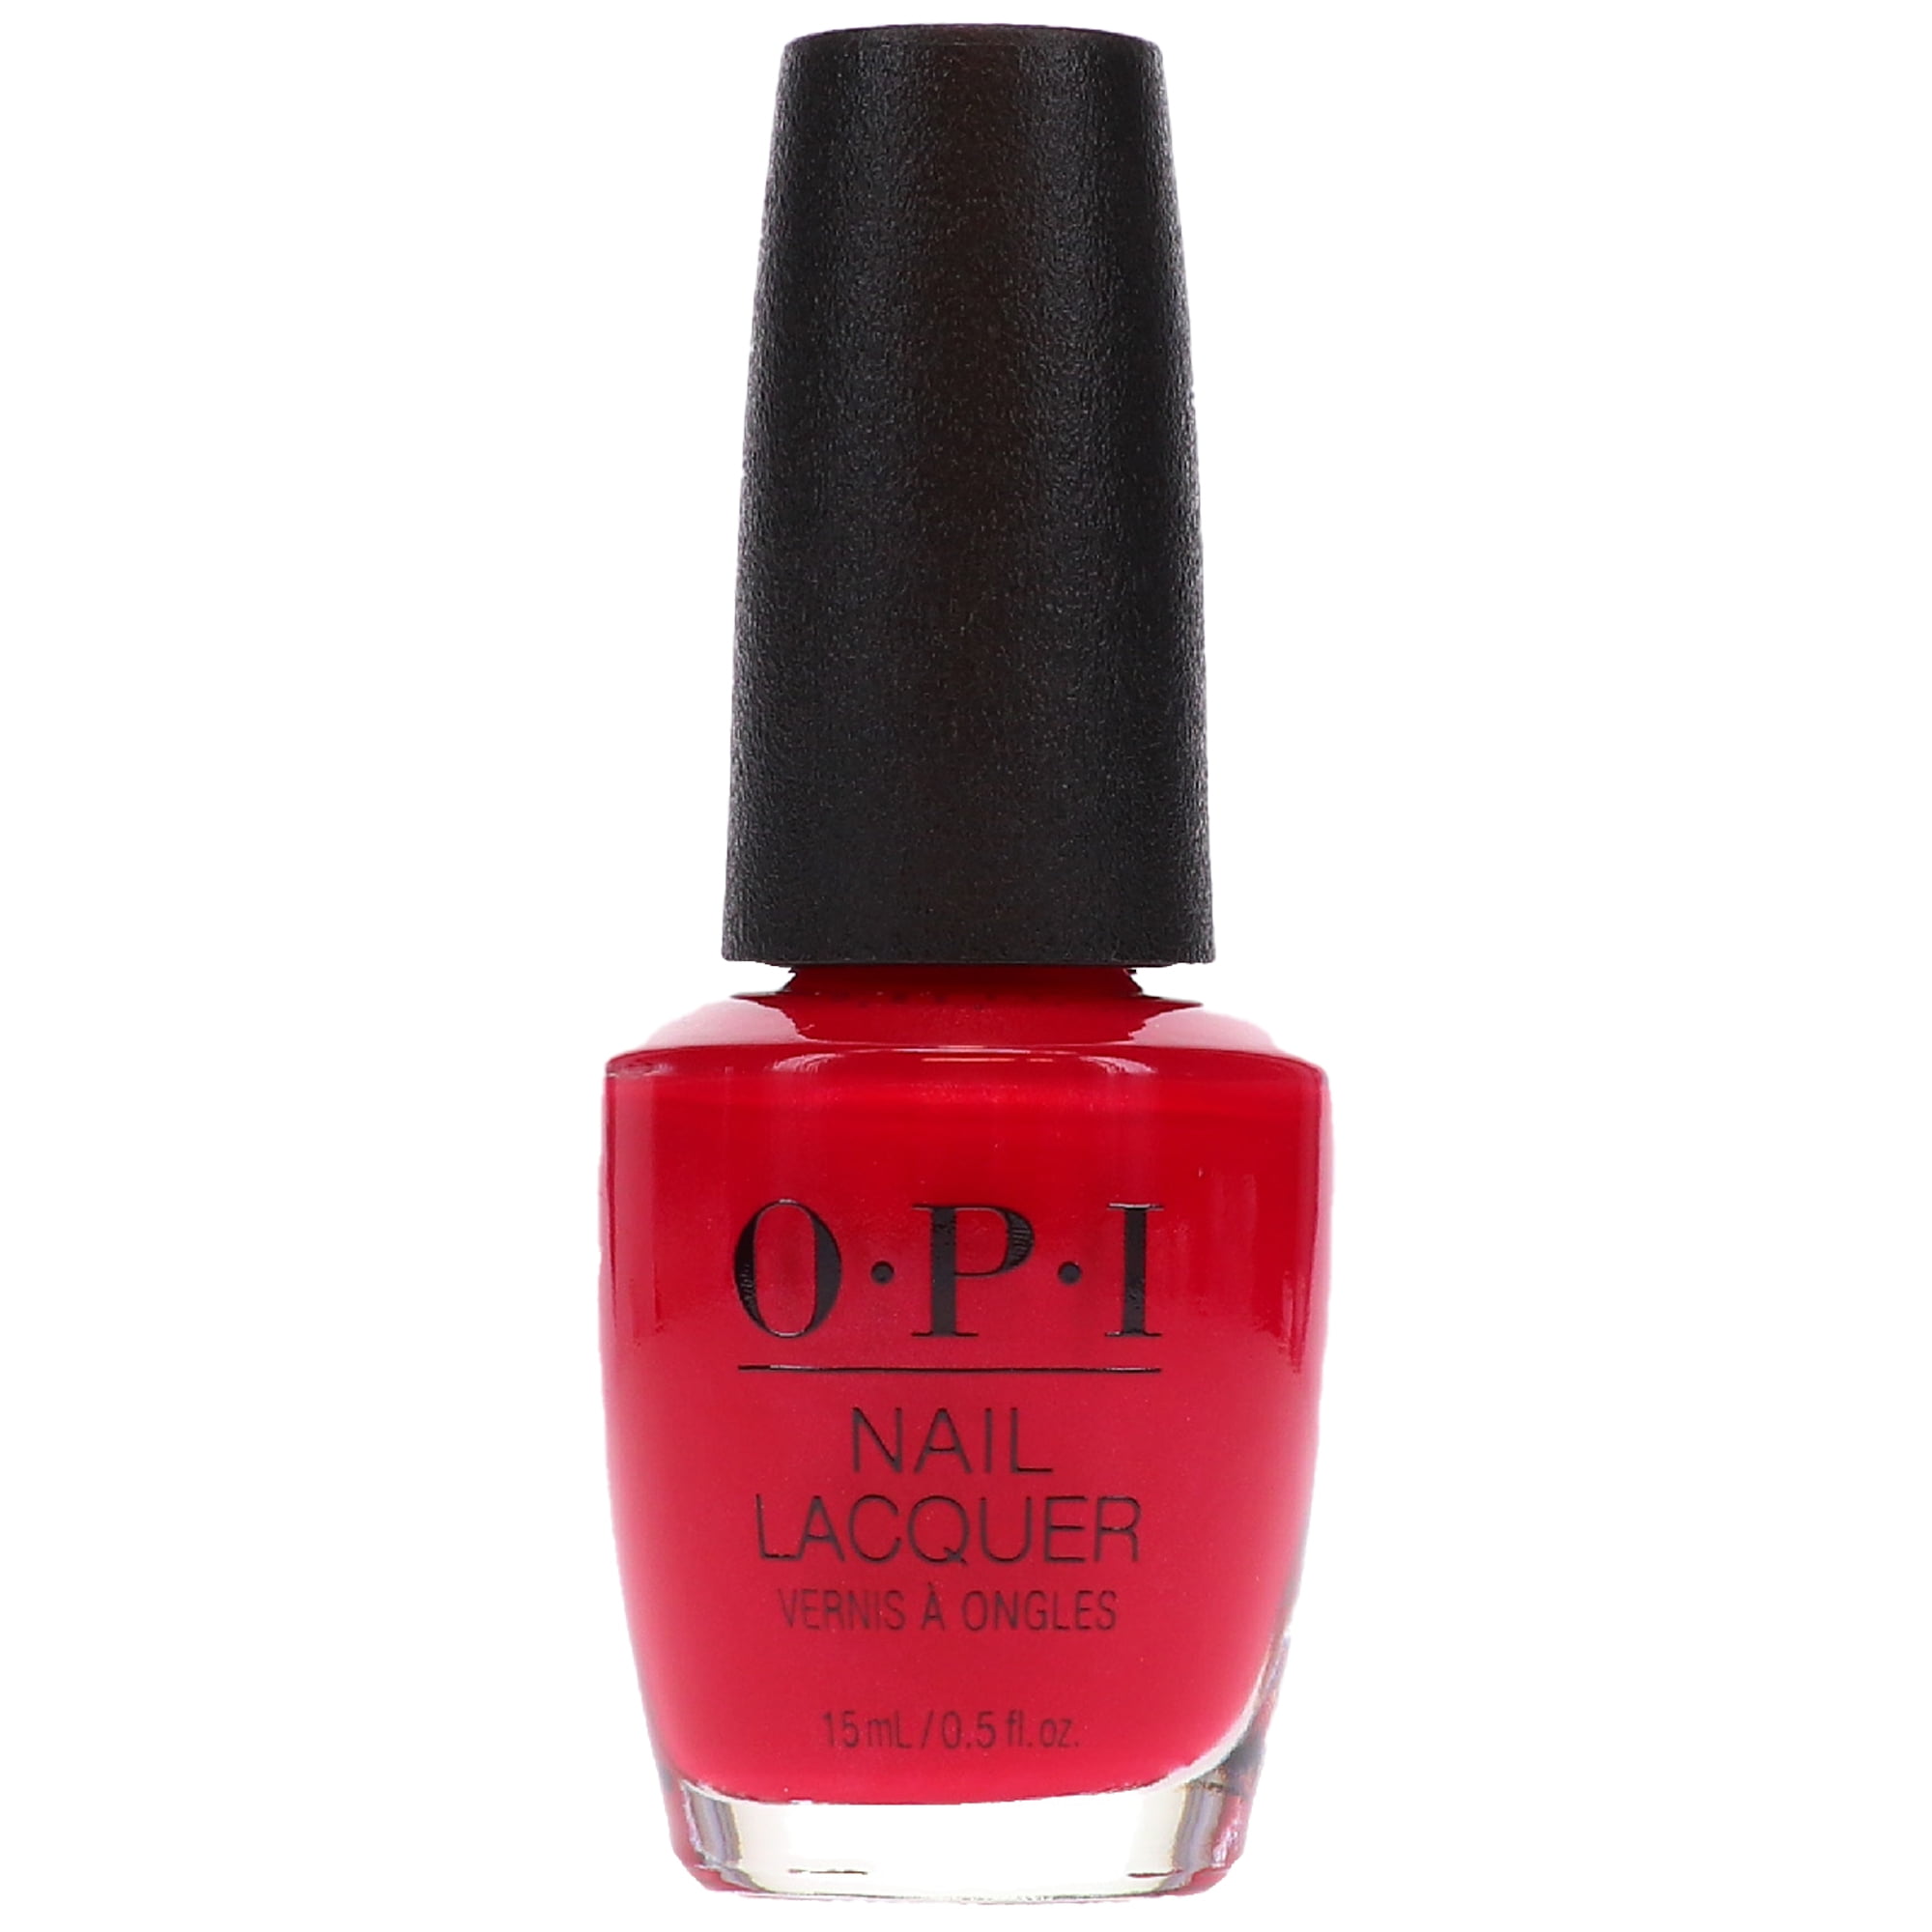 Product Review : OPI Big Apple Red